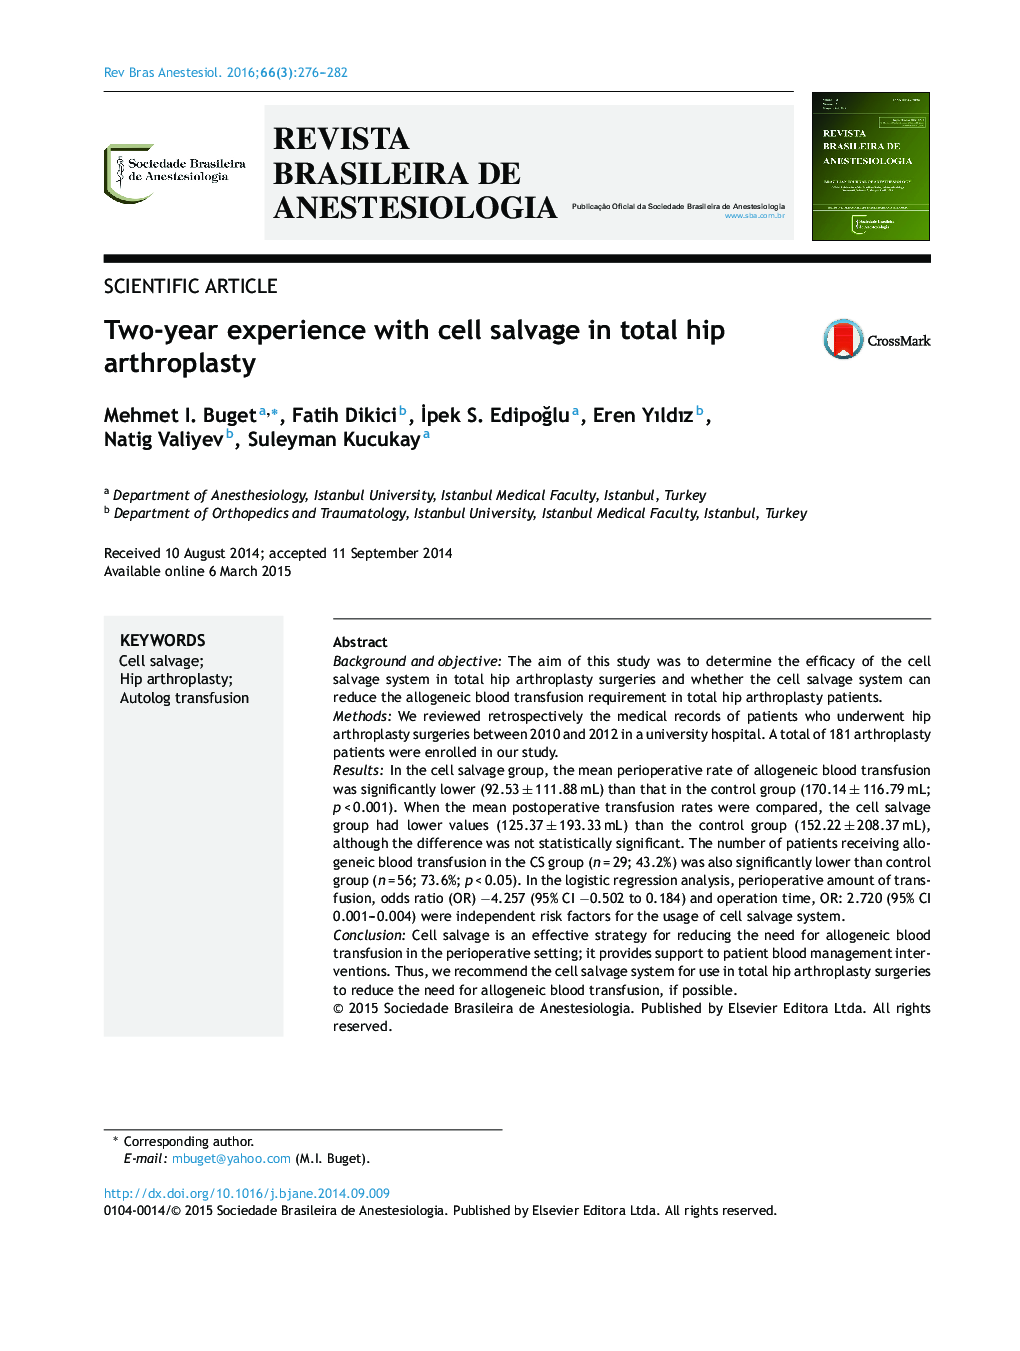 Two-year experience with cell salvage in total hip arthroplasty